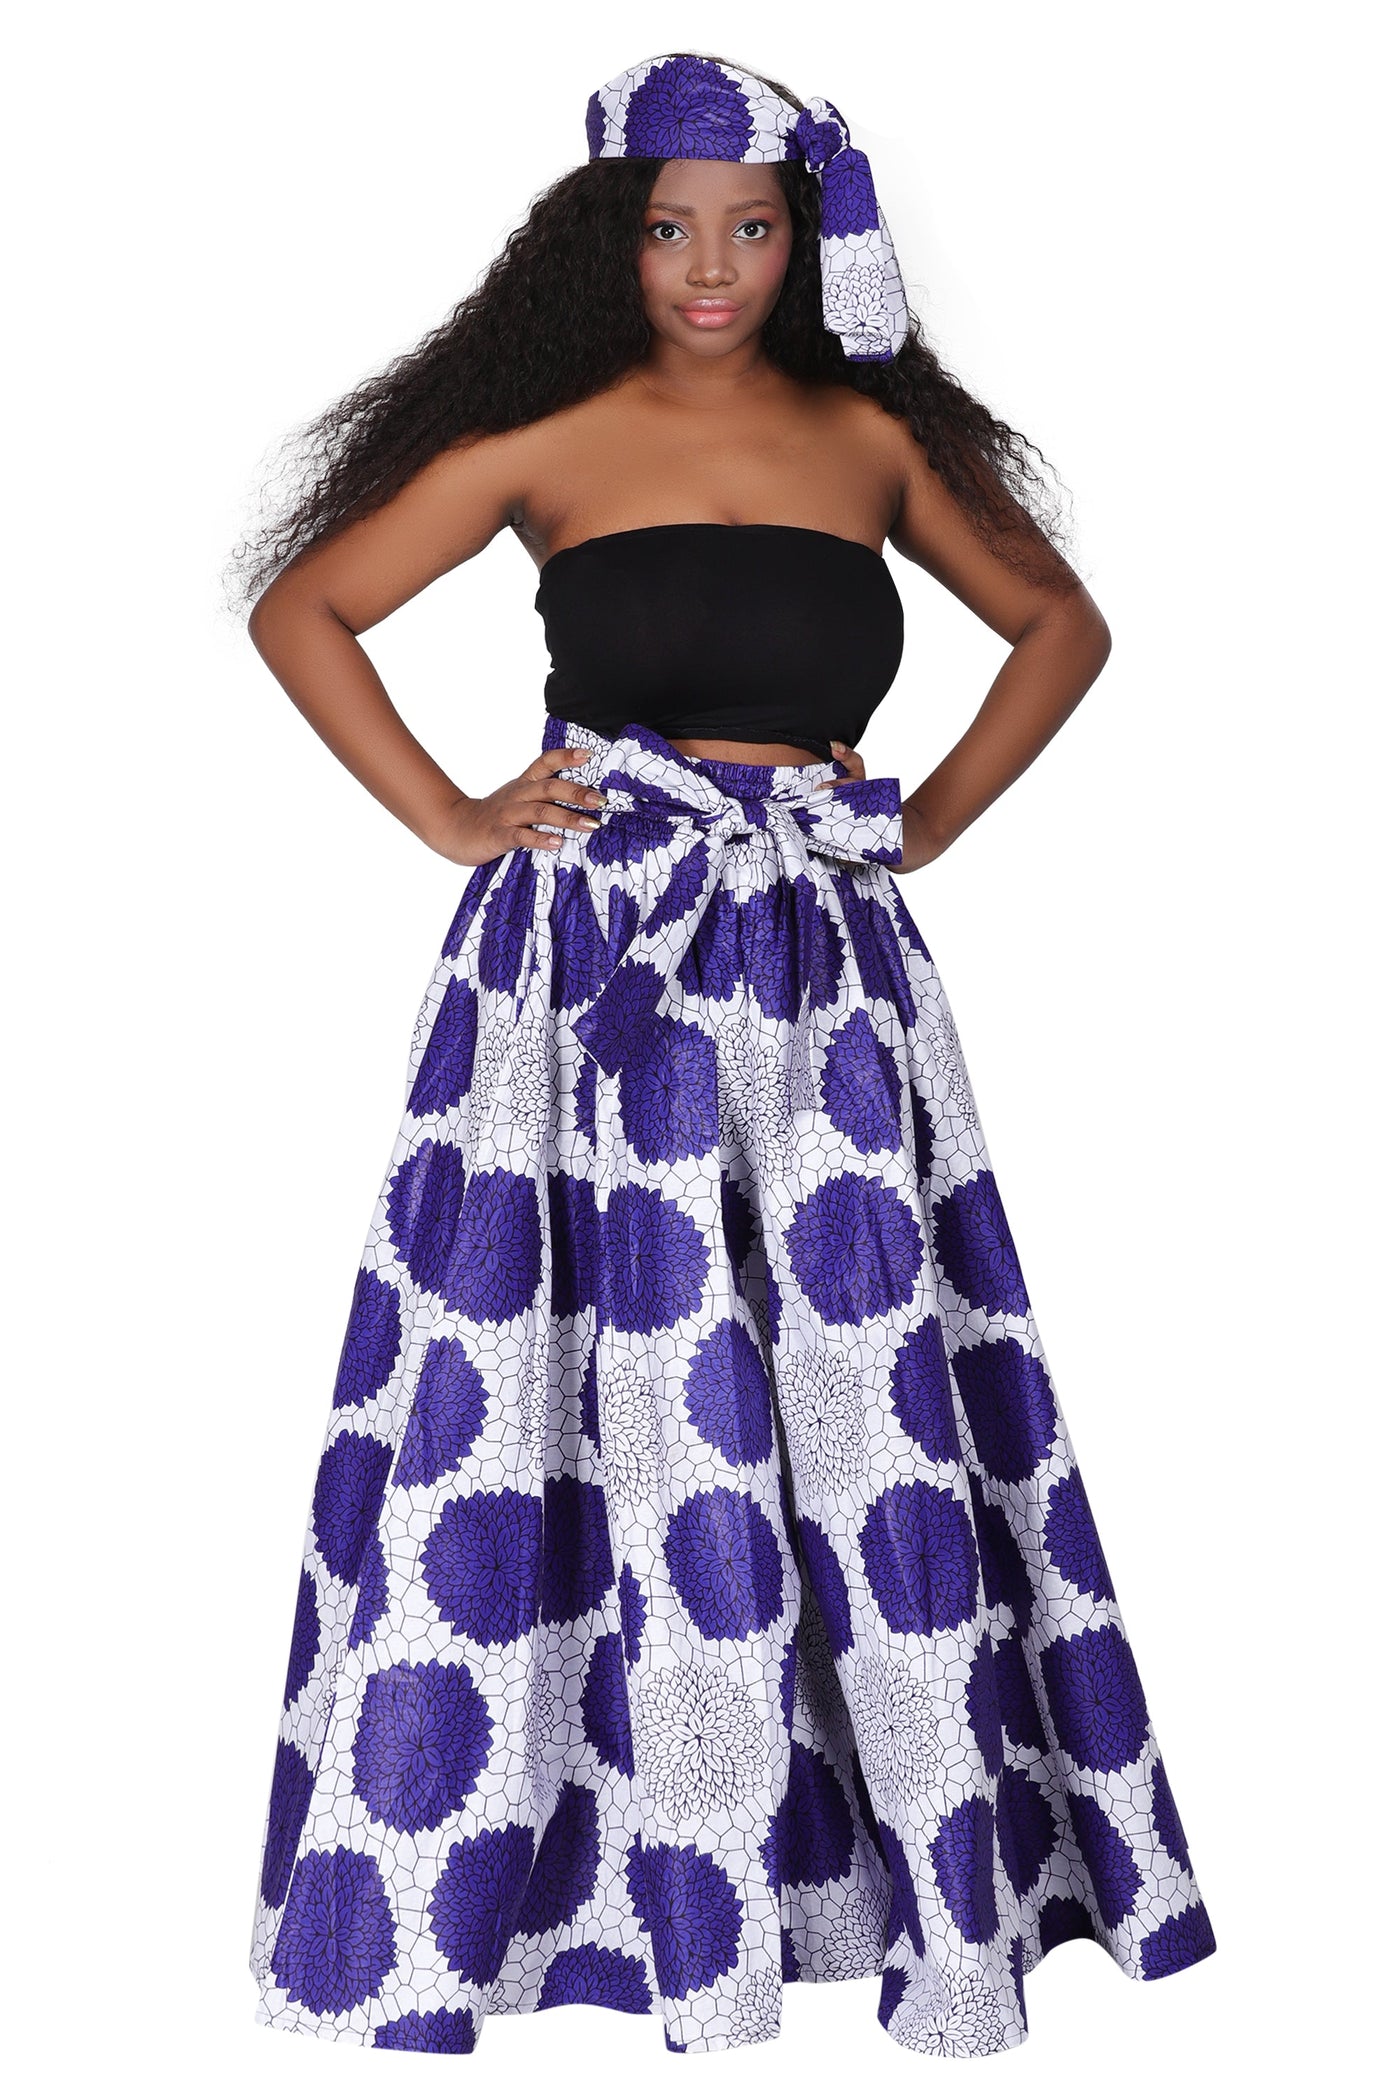 Contrasting Micro Floral Wax Print Skirt 16317-224